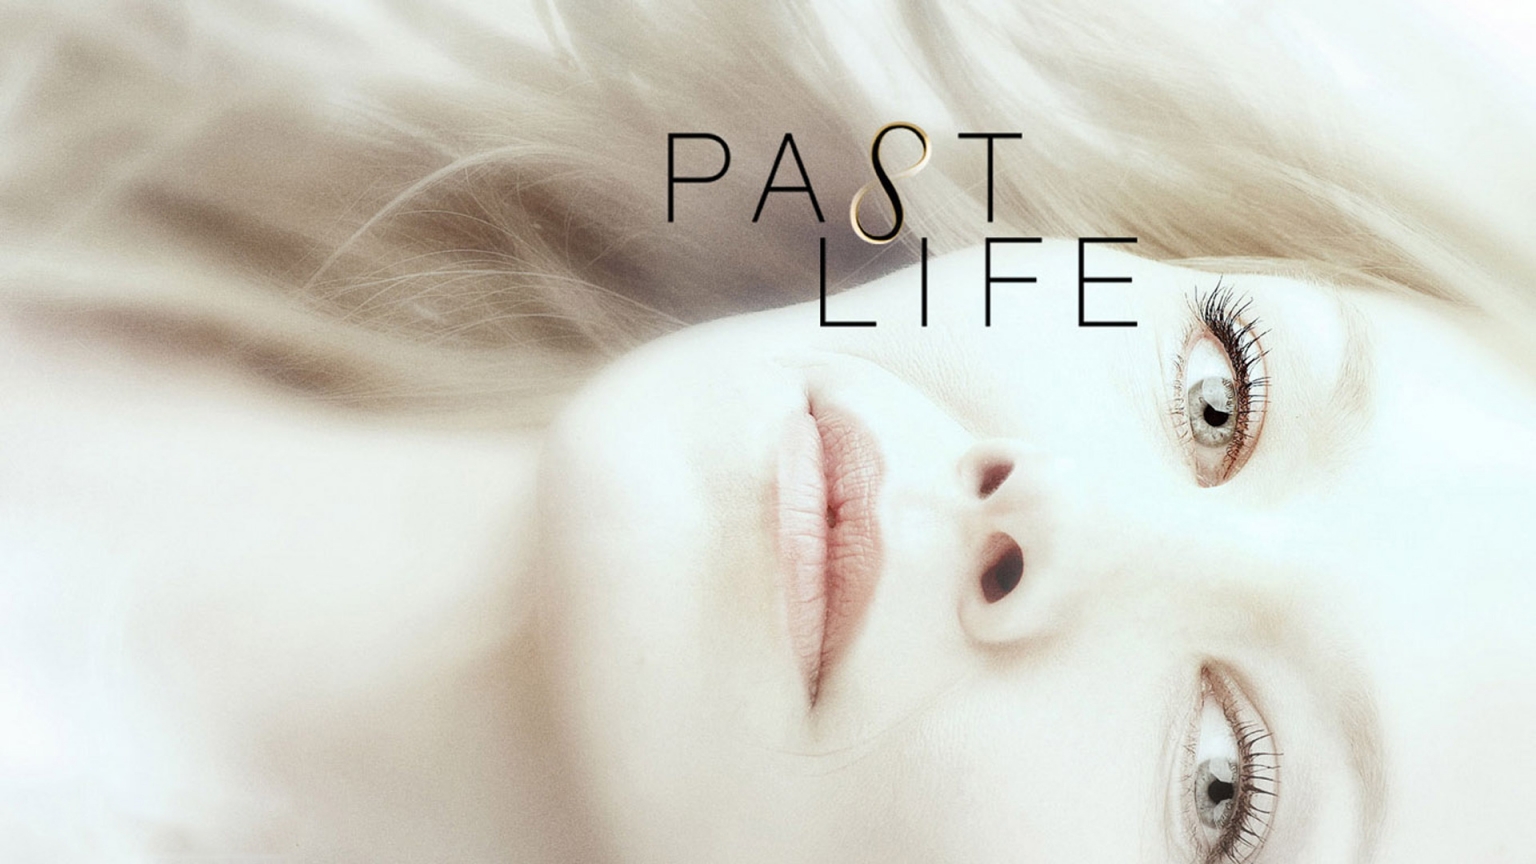 Past Life for 1536 x 864 HDTV resolution